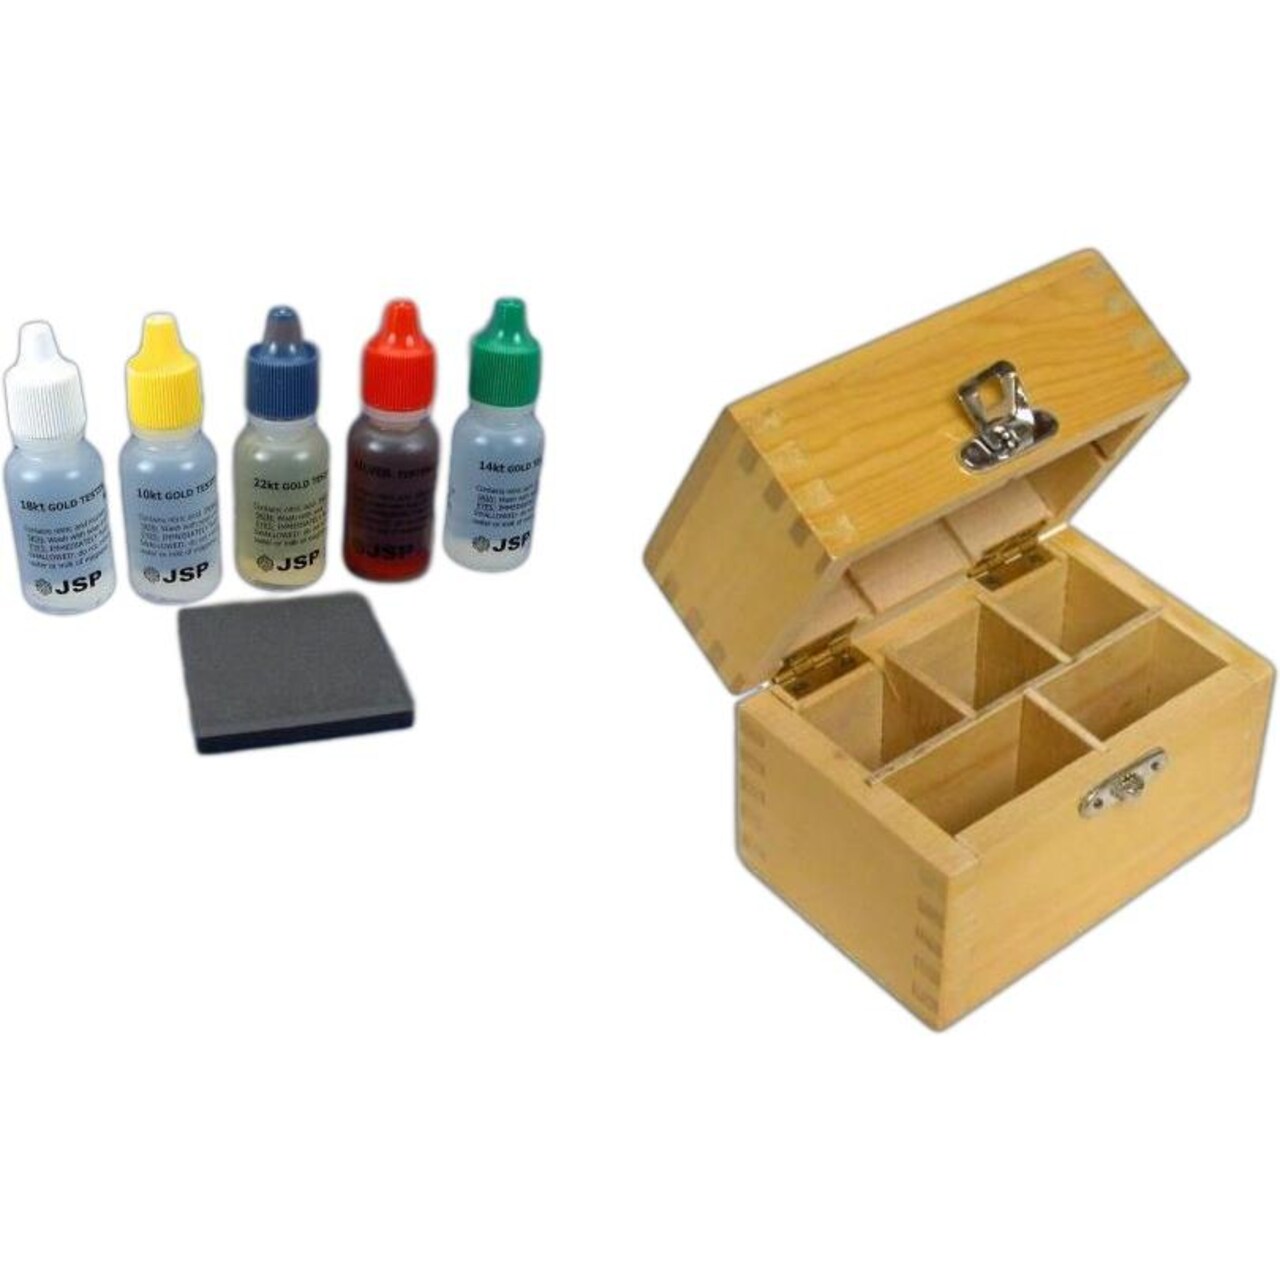 Jewelry Testing Solution Box & Bottles of Testing Acid With Test Stone Kit  7 Pcs